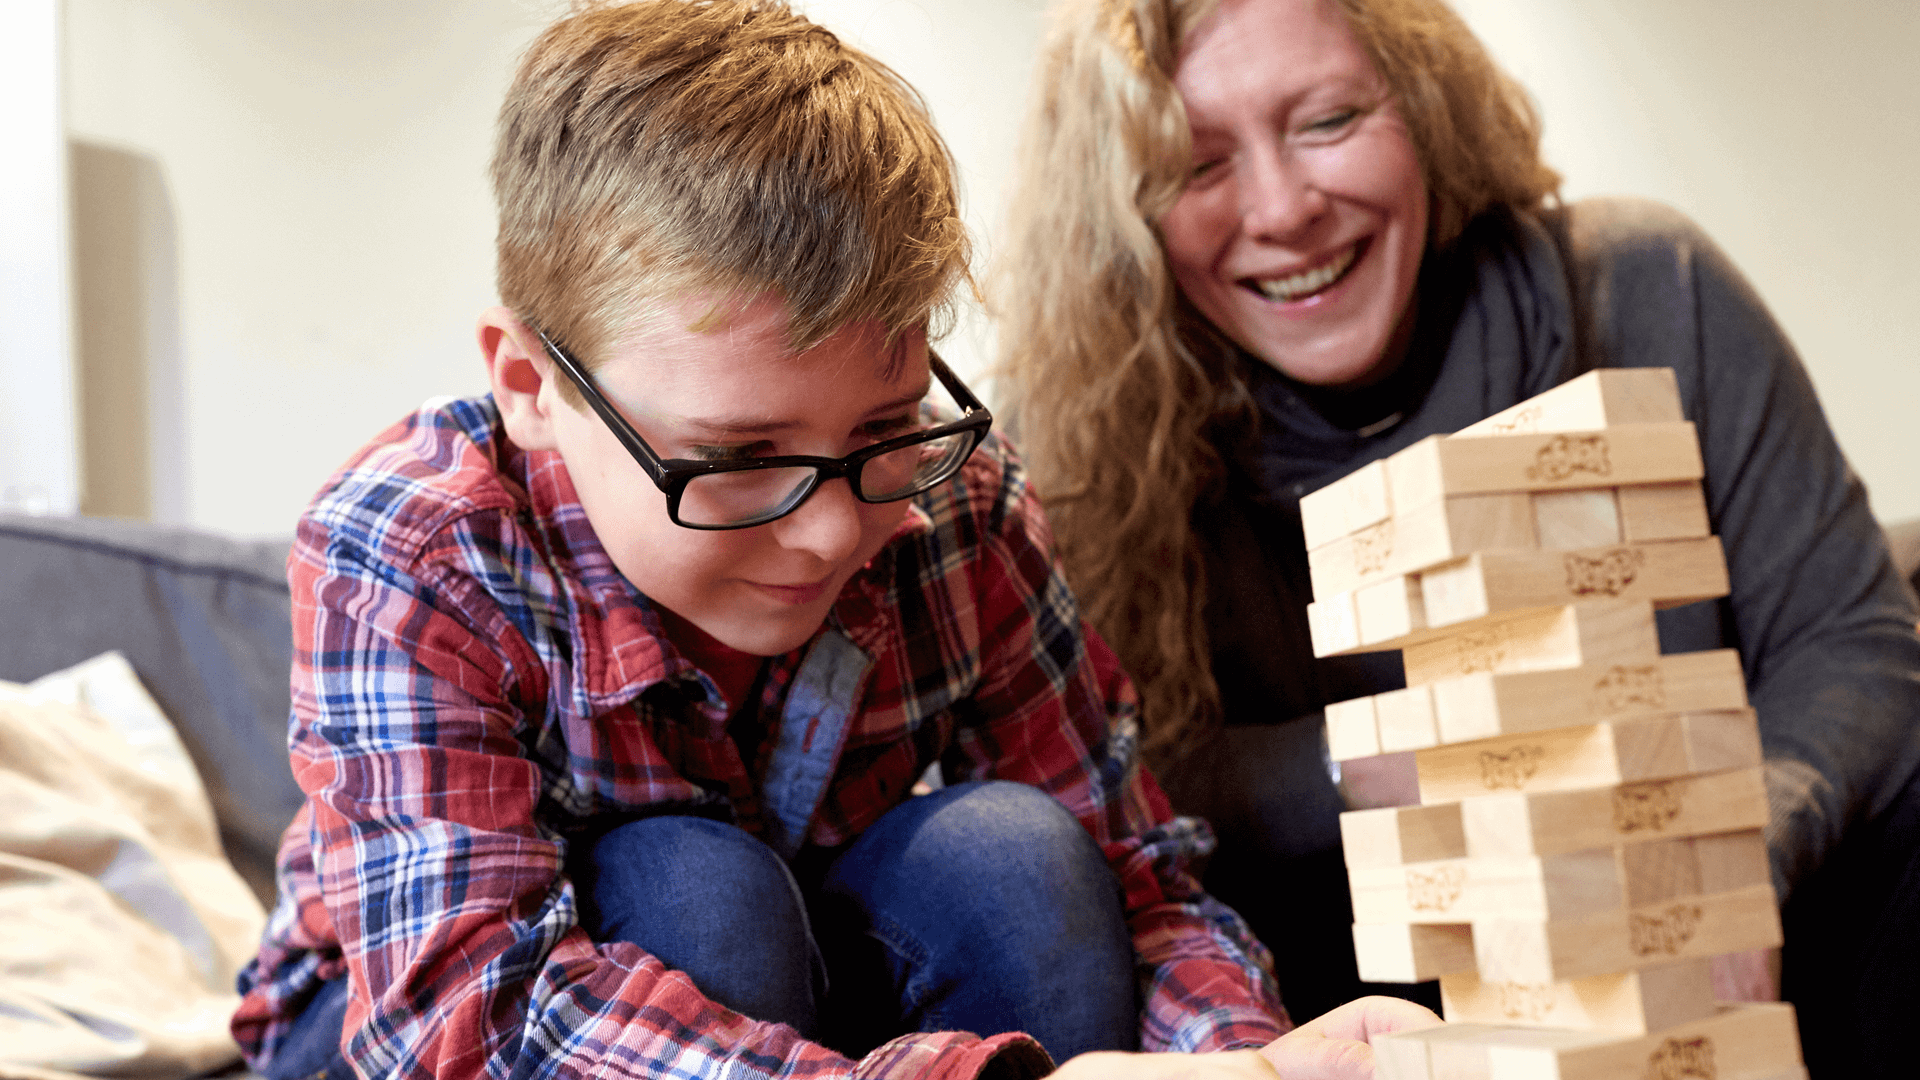 Mother and son playing jenga together having a lot of fun 